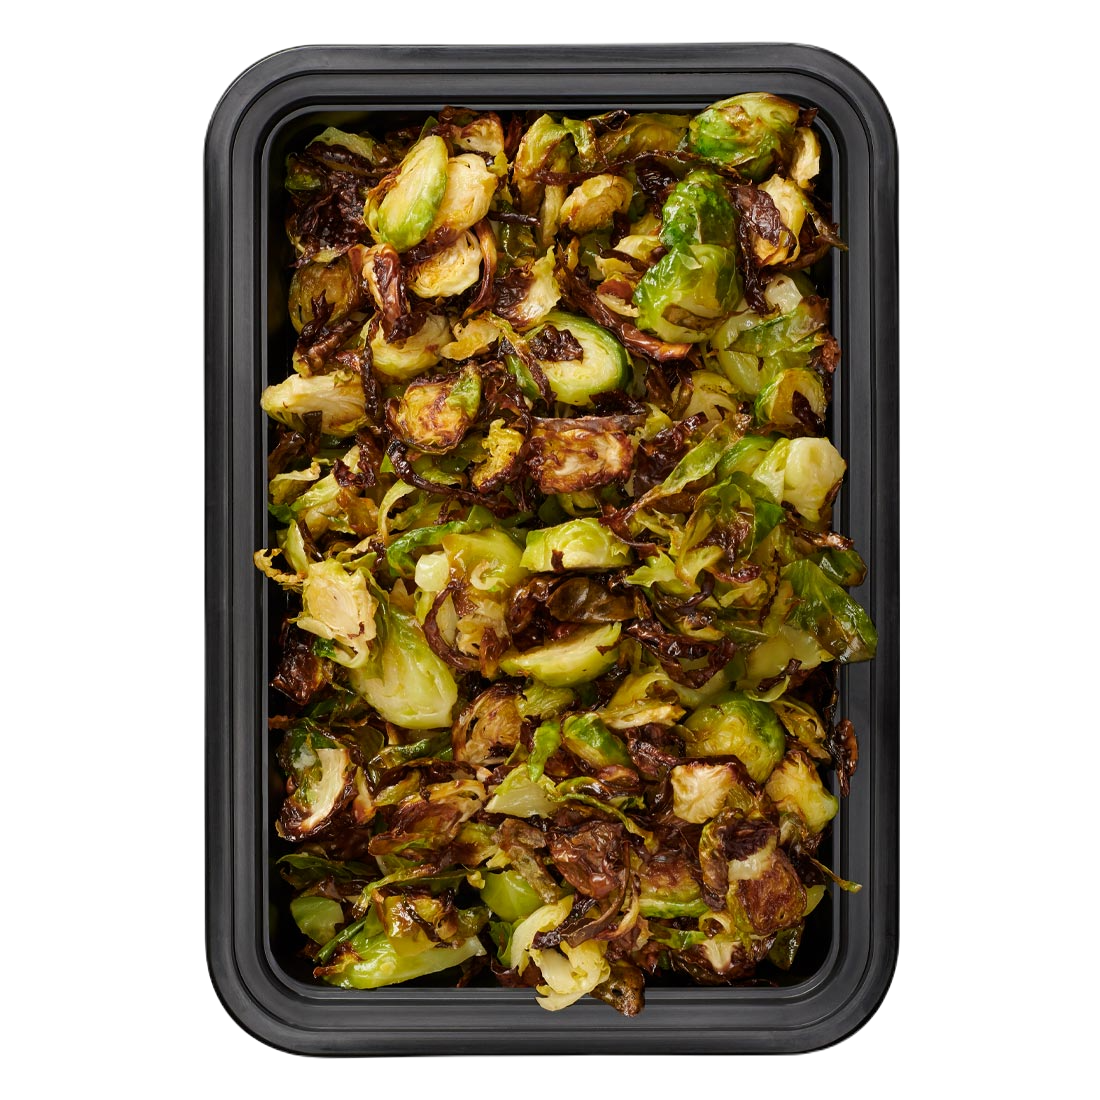 A La Carte - Roasted Brussels Sprouts